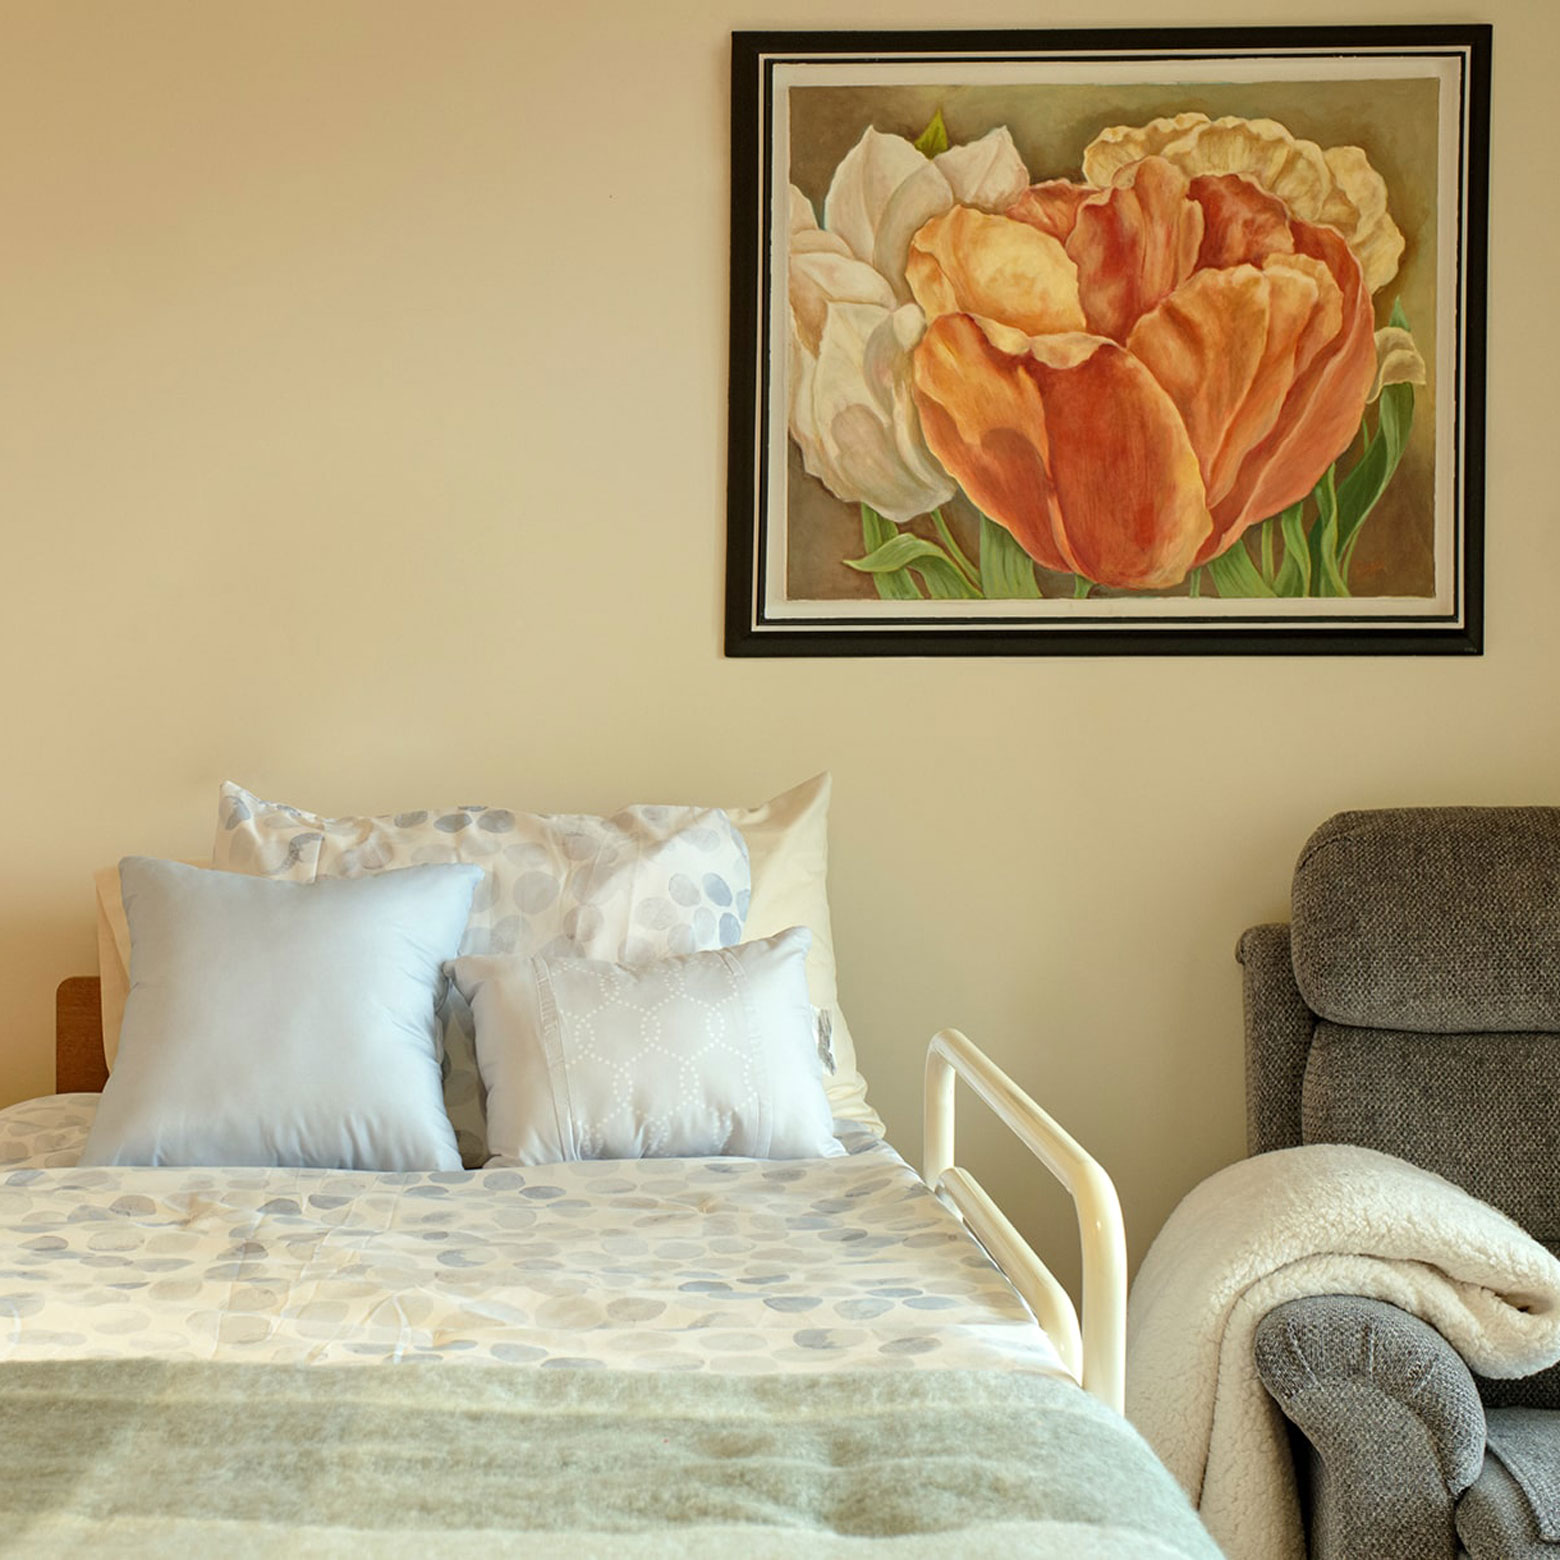 beautiful painting of flowers hung above bed